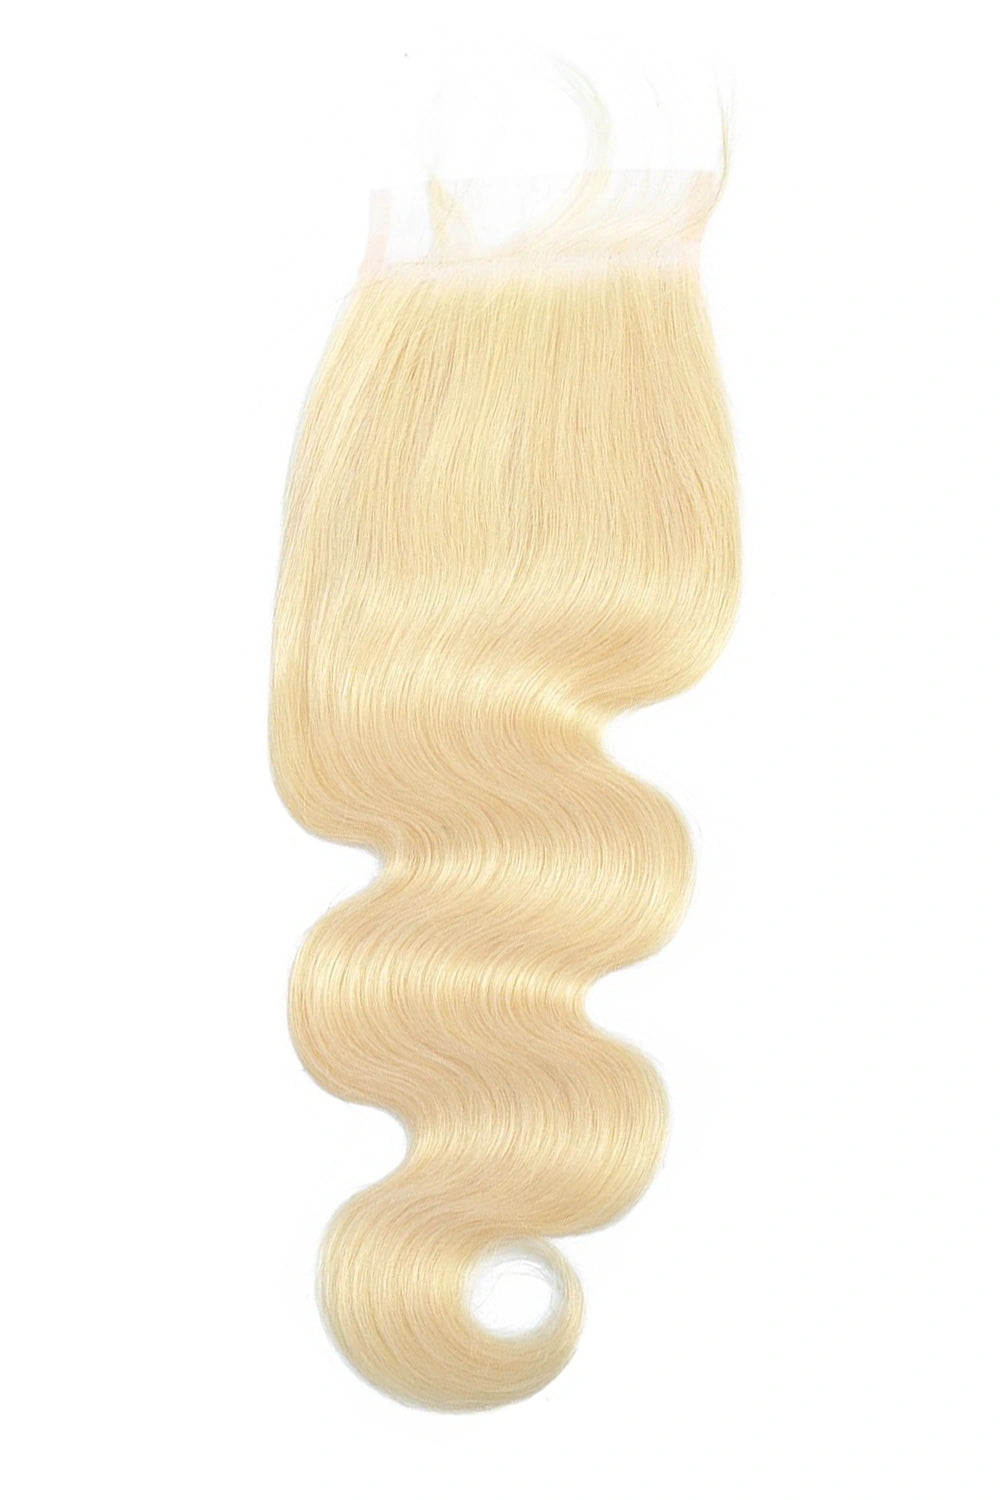 5x5 Blonde HD Lace Closure Body Wave Virgin Hair for Wig Making